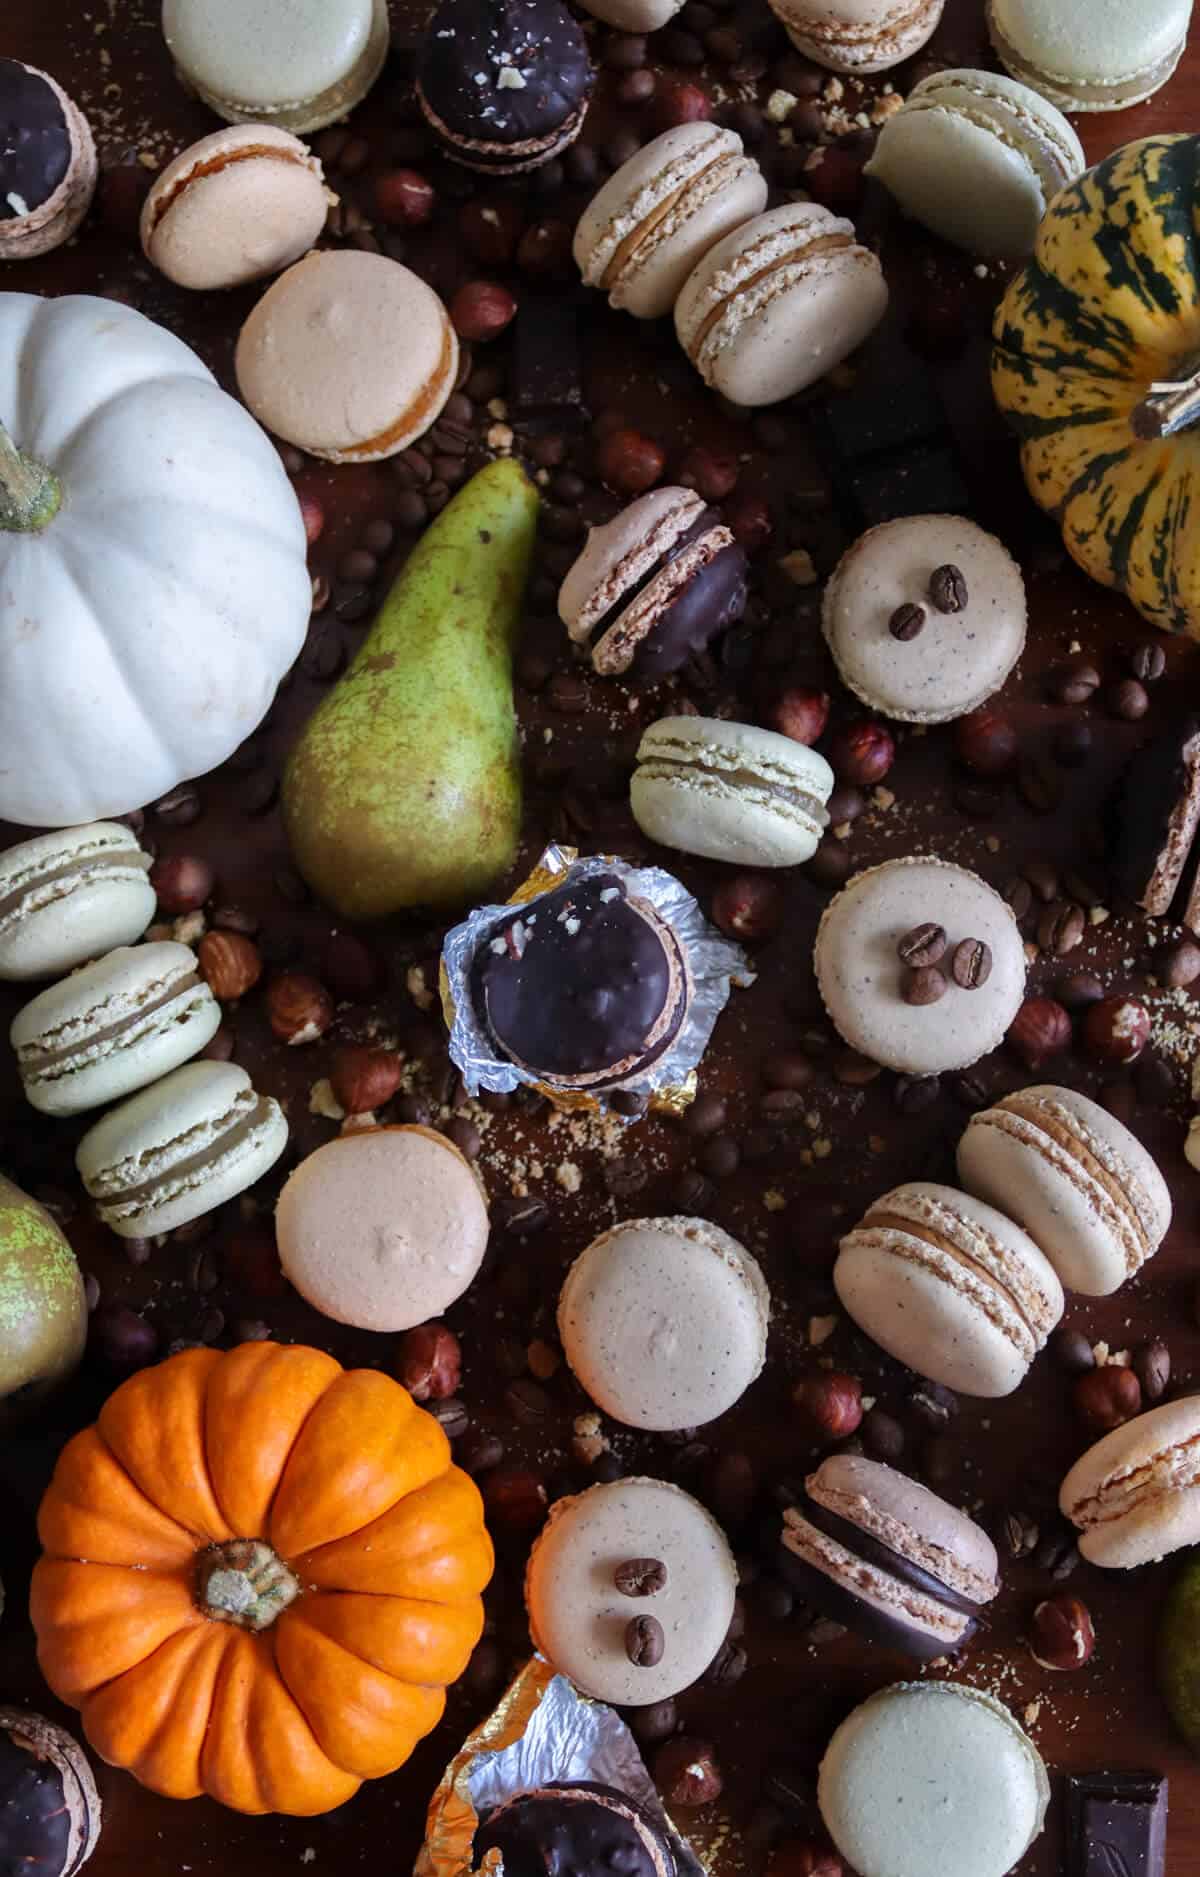 Fall macarons displayed on a table surrounded by pumpkins, nuts, pears and coffee beans.